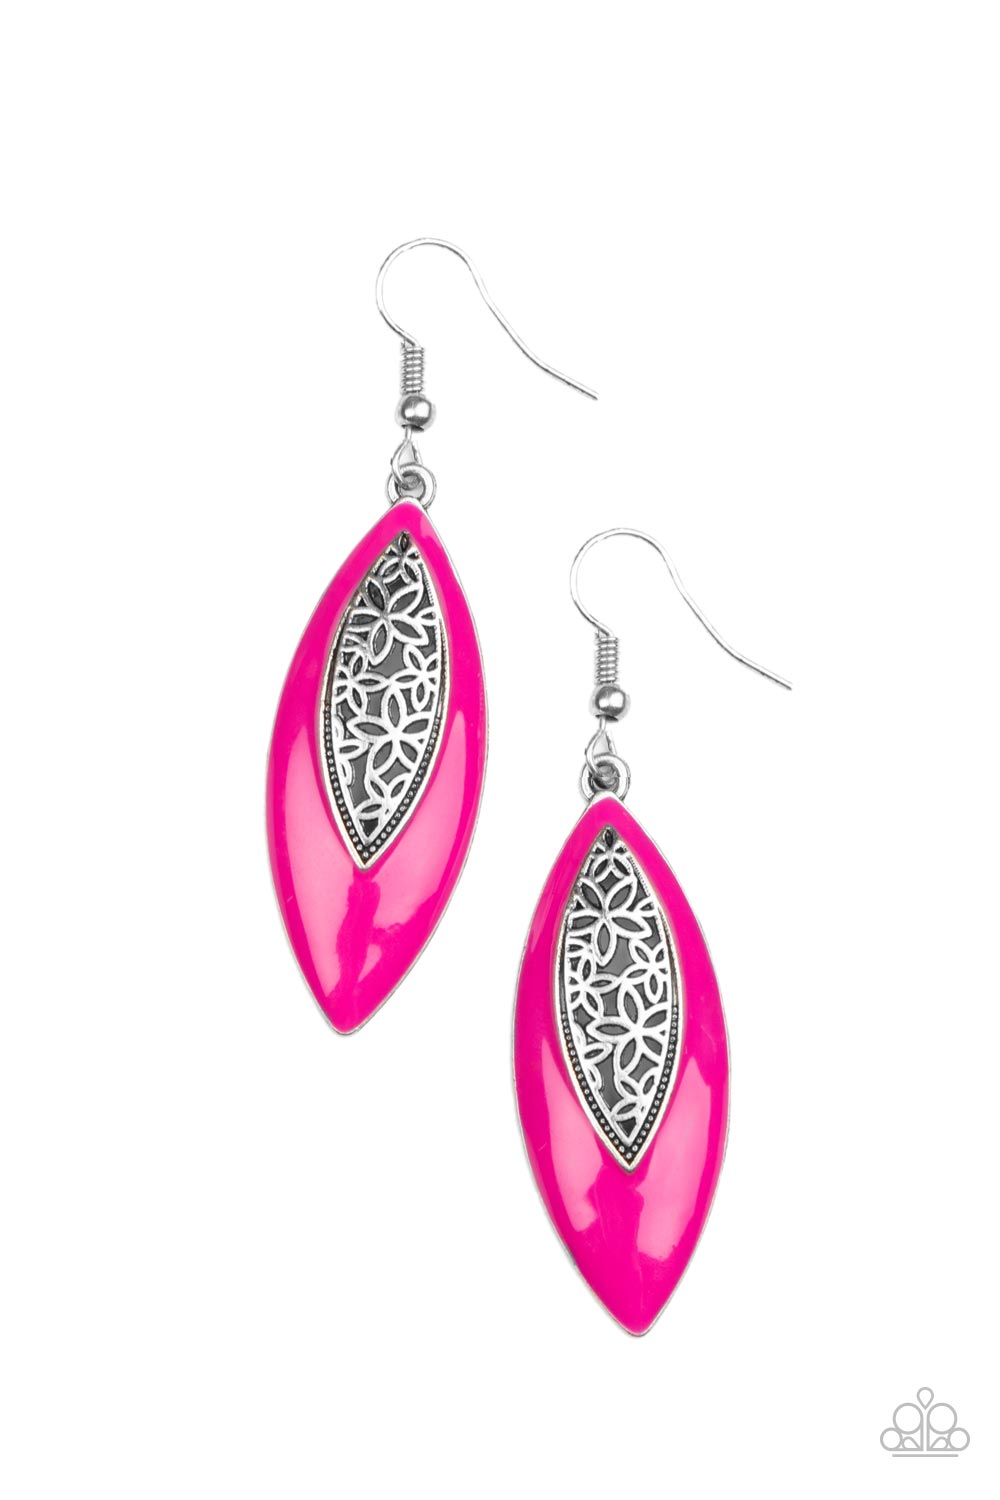 Venetian Vanity - Pink and Silver Earrings - Paparazzi Accessories - Asymmetrically bordered in a Fuchsia Fedora frame, airy silver filigree blooms along the center of a colorful lure for a seasonal flair. Earring attaches to a standard fishhook fitting. Sold as one pair of earrings.